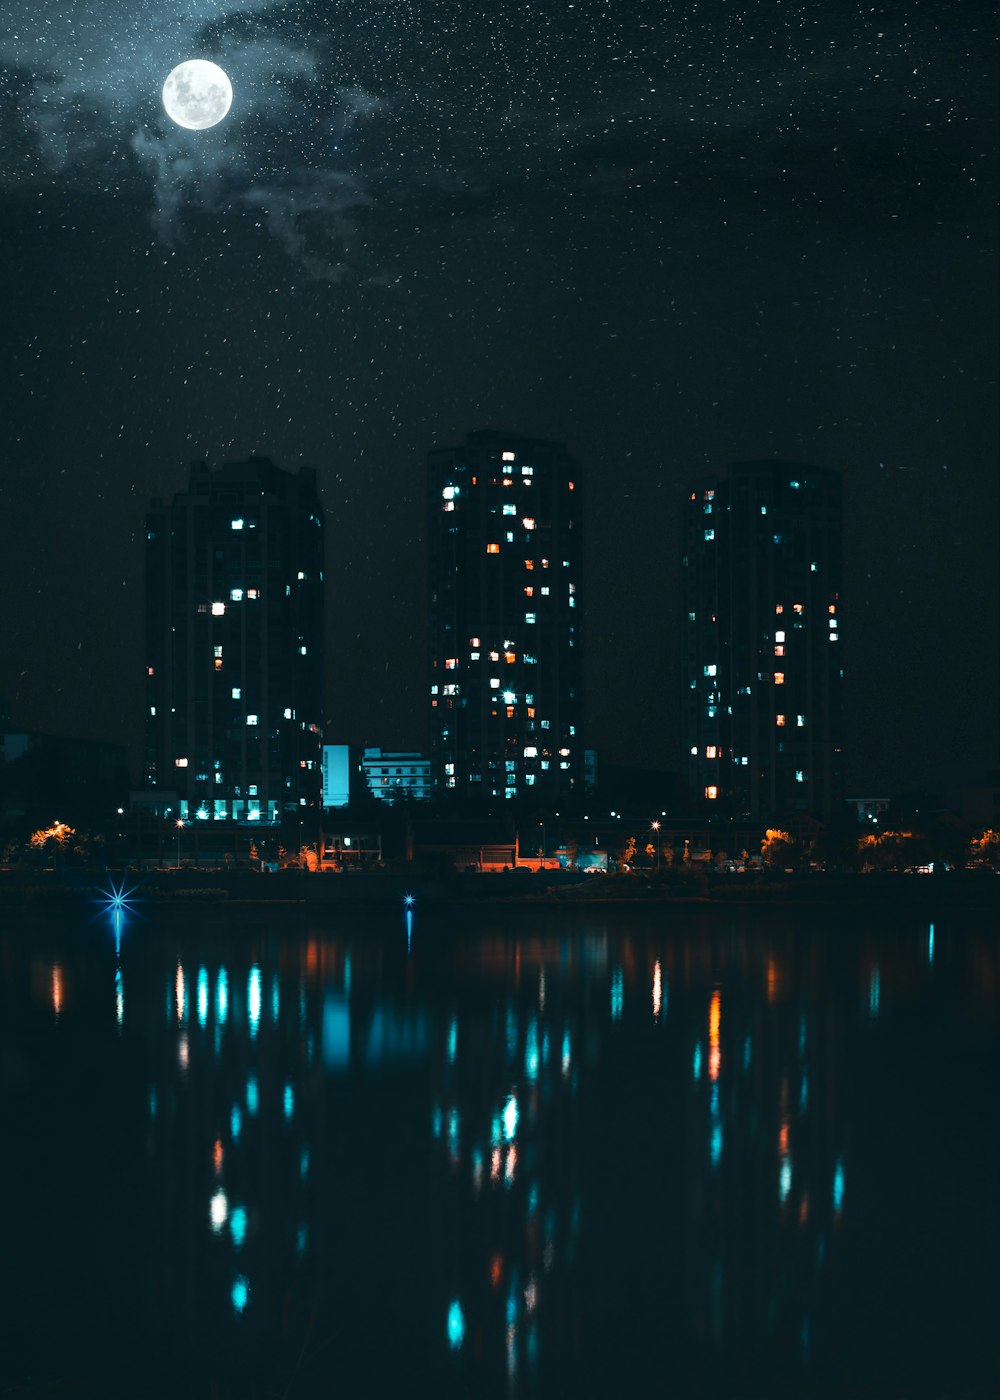 lighted building reflection on body of water during night